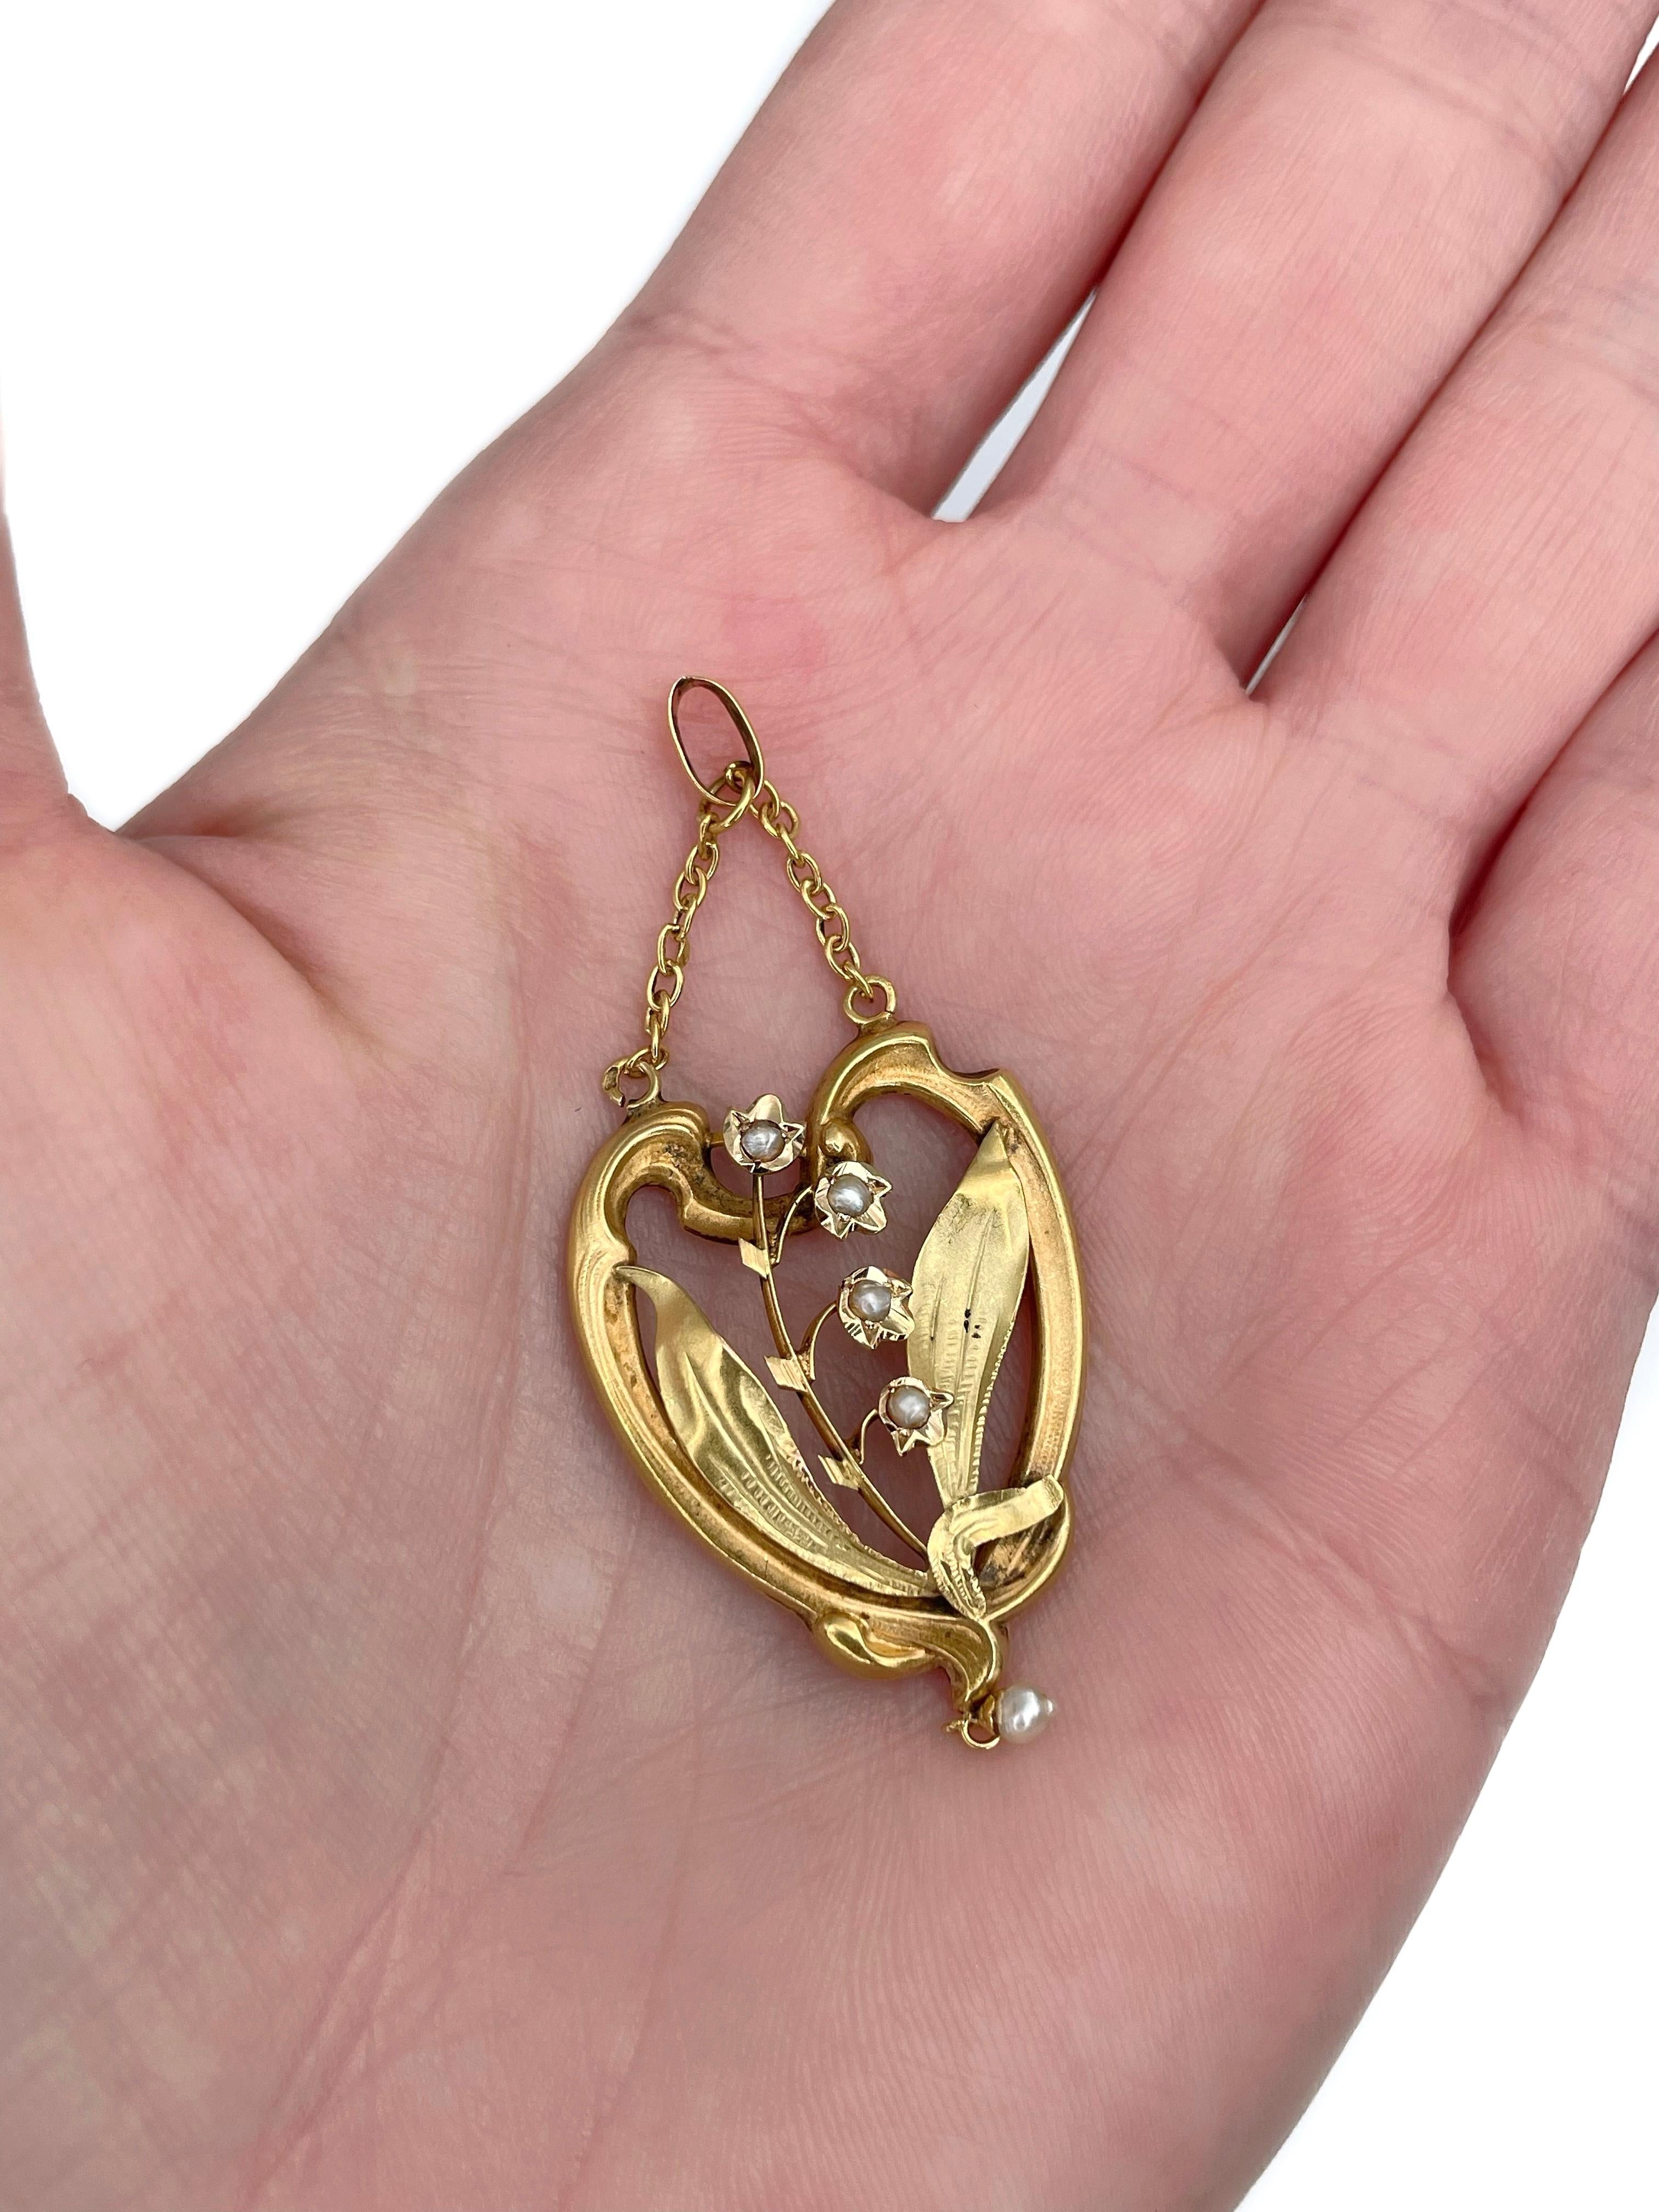 This is an Art Nouveau pendant depicting a lily of the valley. It is crafted in 18K yellow gold and features seed pearls. Circa 1900. 

Weight: 2.26g
Size: 5.8x2.3cm

———

If you have any questions, please feel free to ask. We describe our items